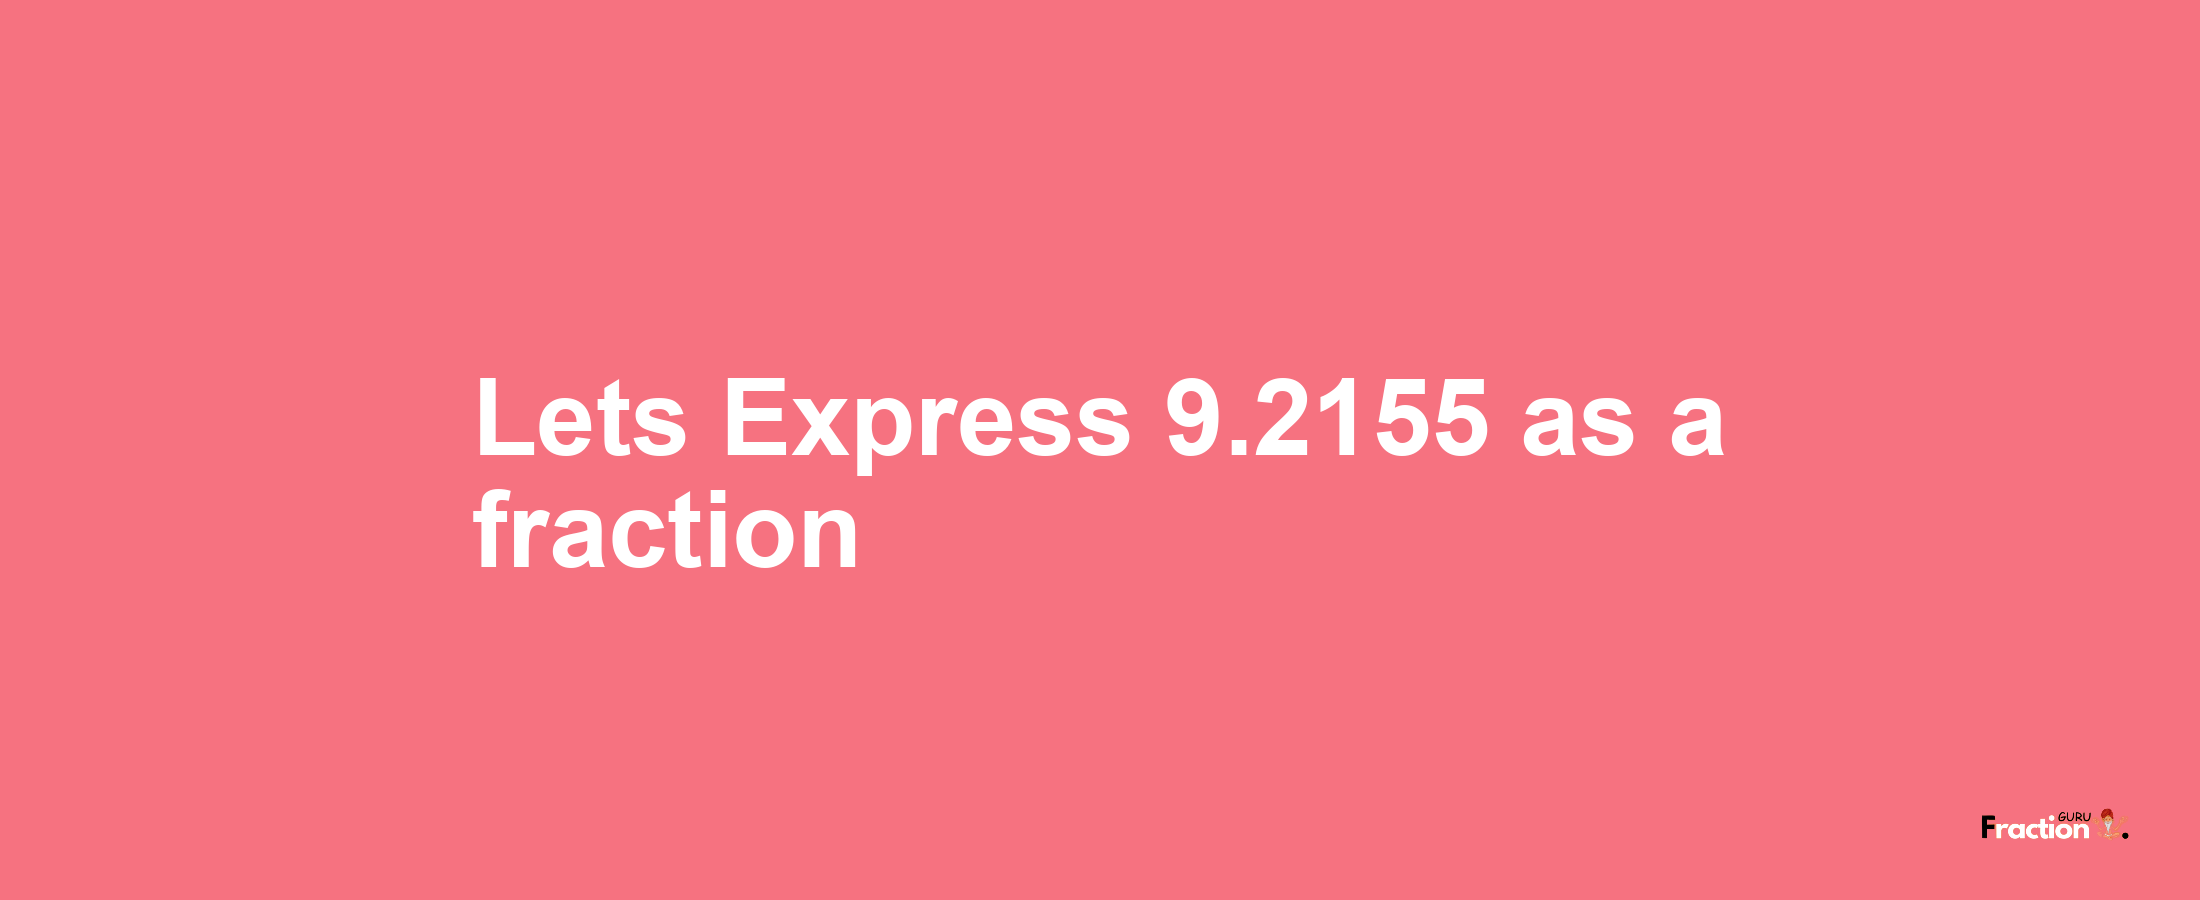 Lets Express 9.2155 as afraction